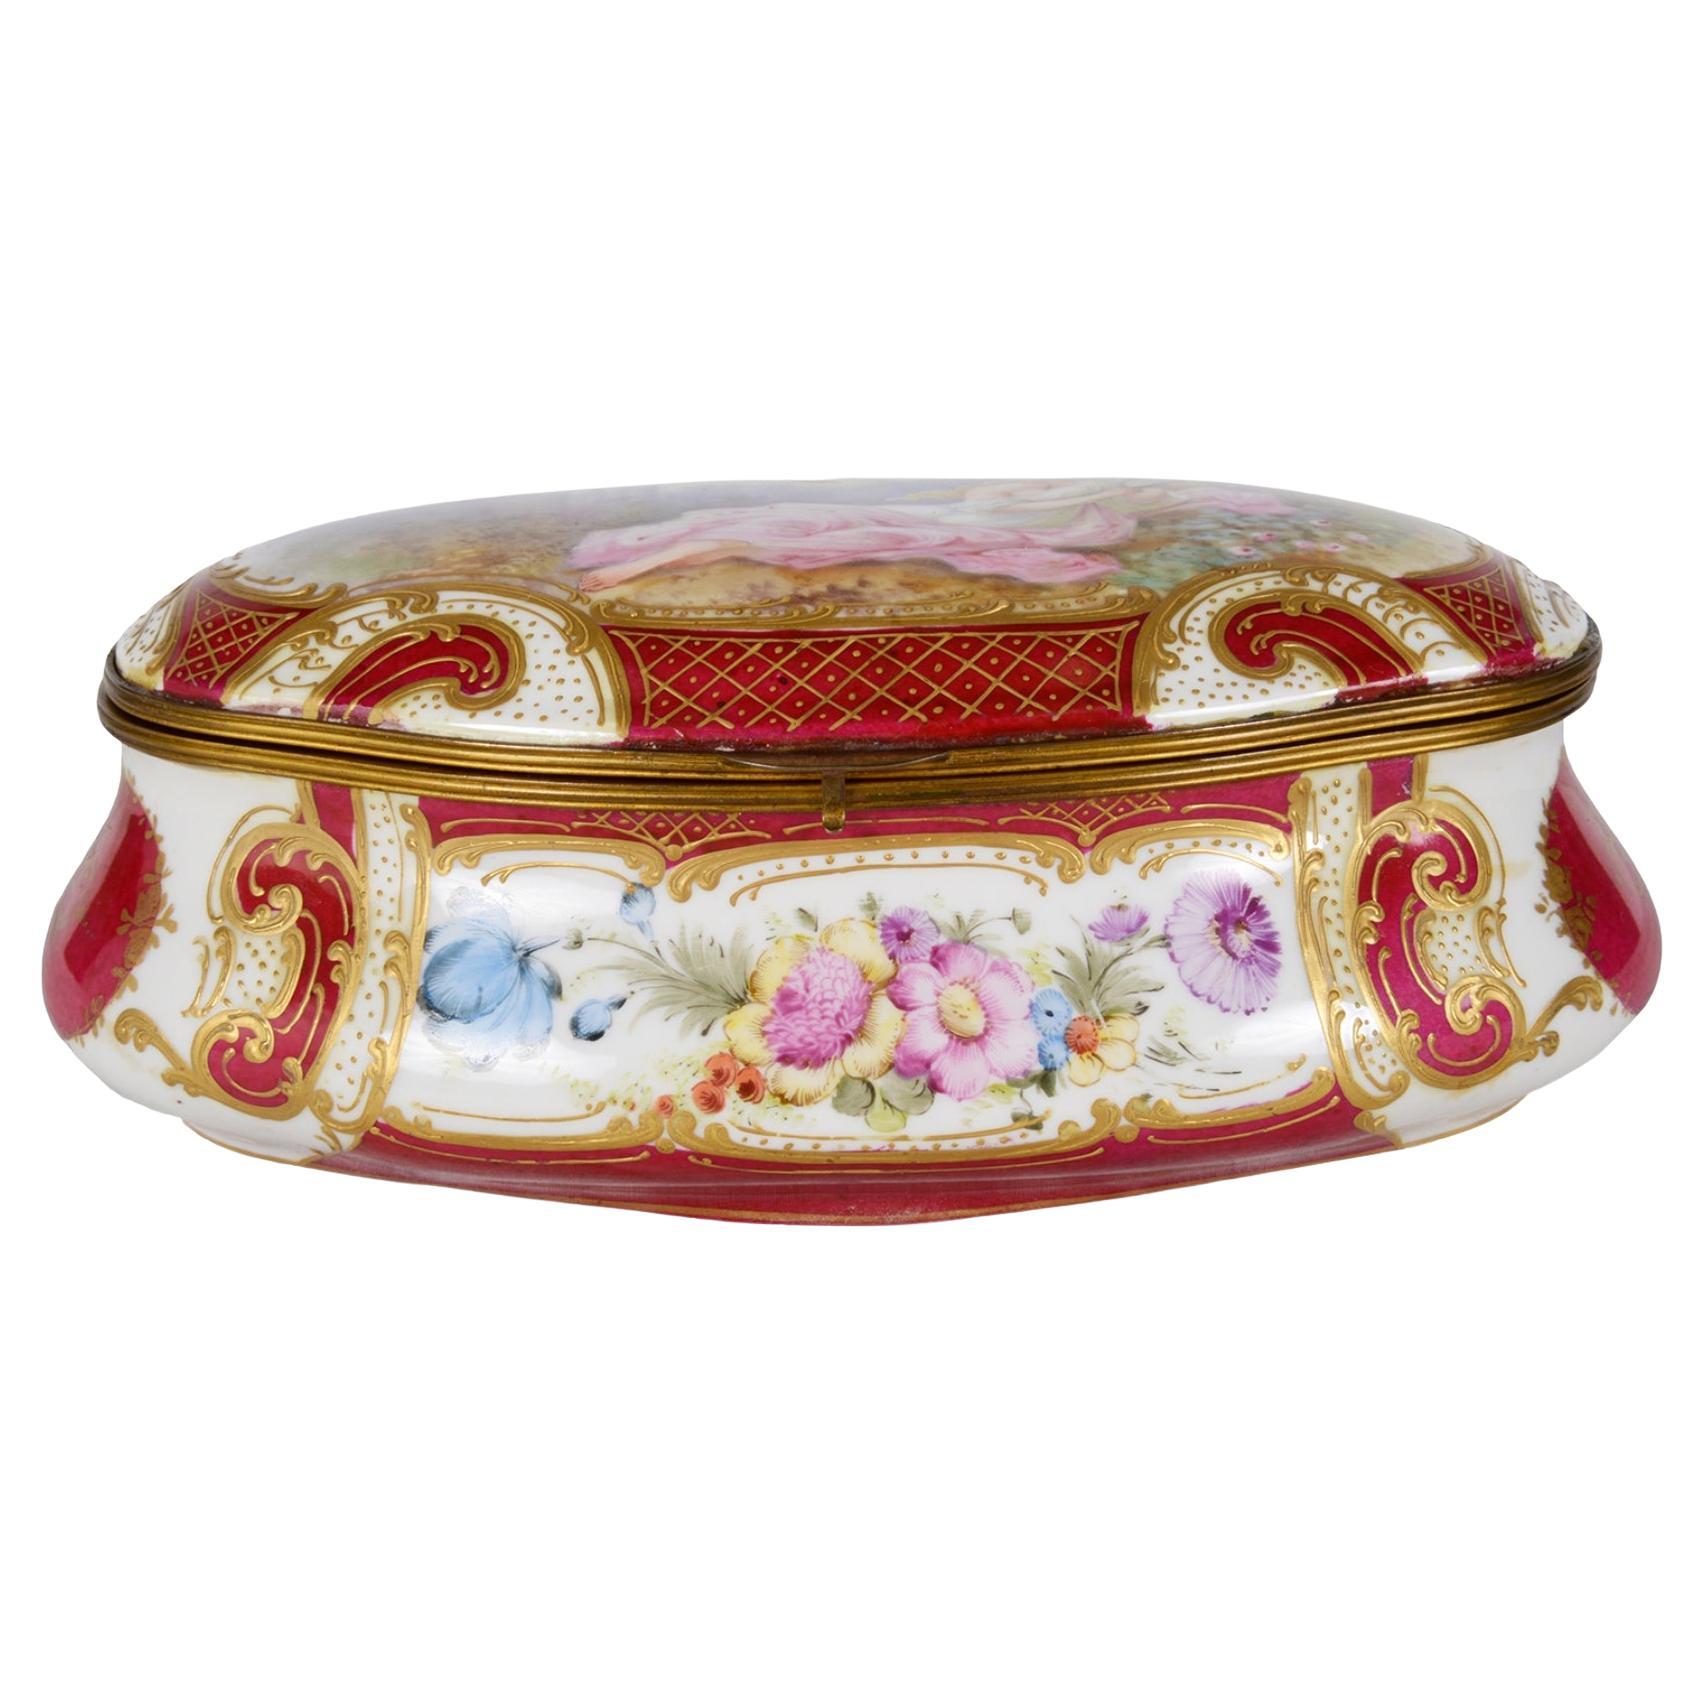 Late 19th Century French Sevres Style Porcelain Casket